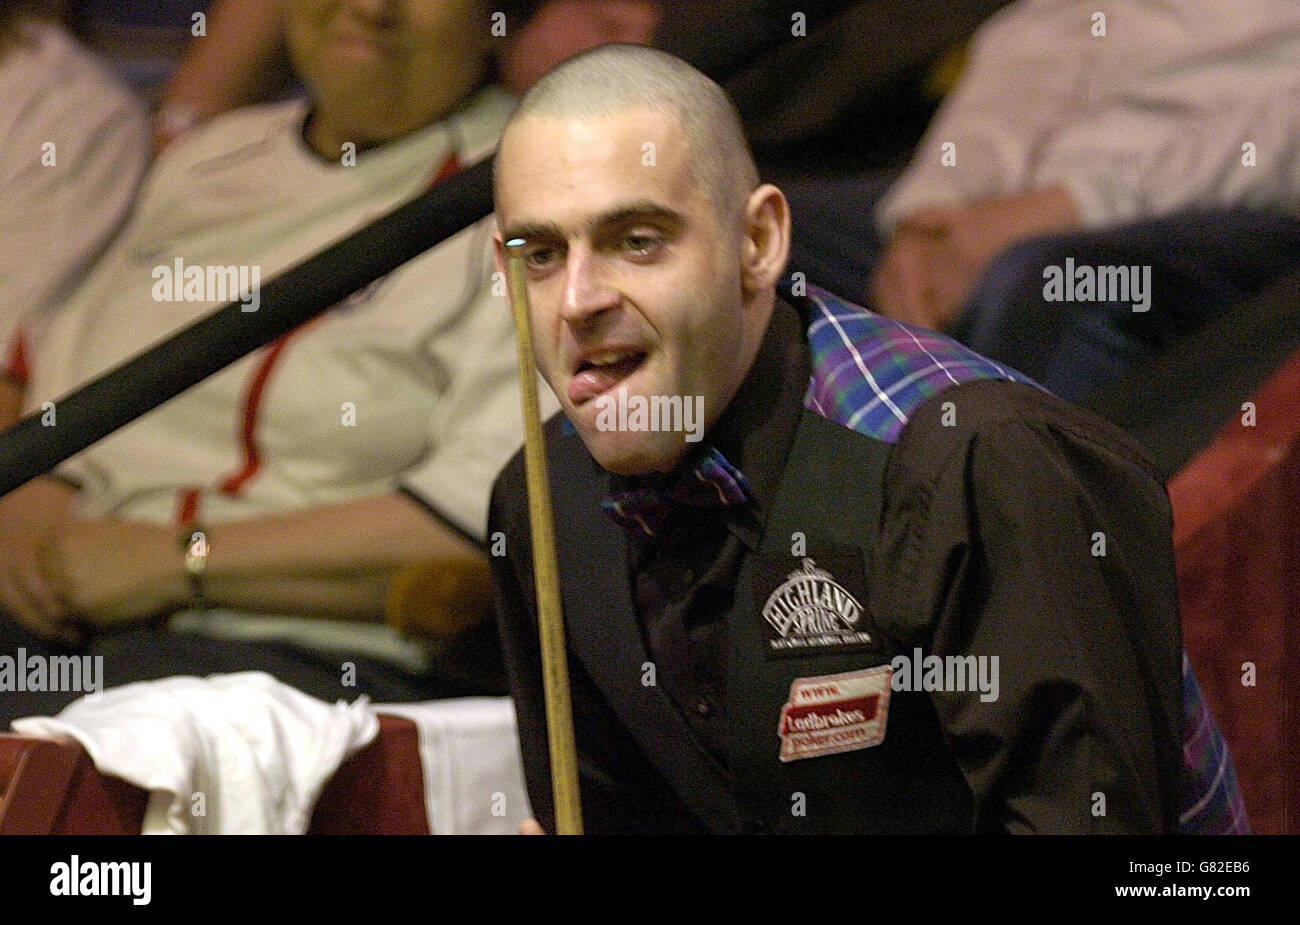 Snooker - Embassy World Championship 2005 - Second Round - Ronnie O'Sullivan v Allister Carter - The Crucible. Ronnie O'Sullivan ponders after taking a shot. Stock Photo